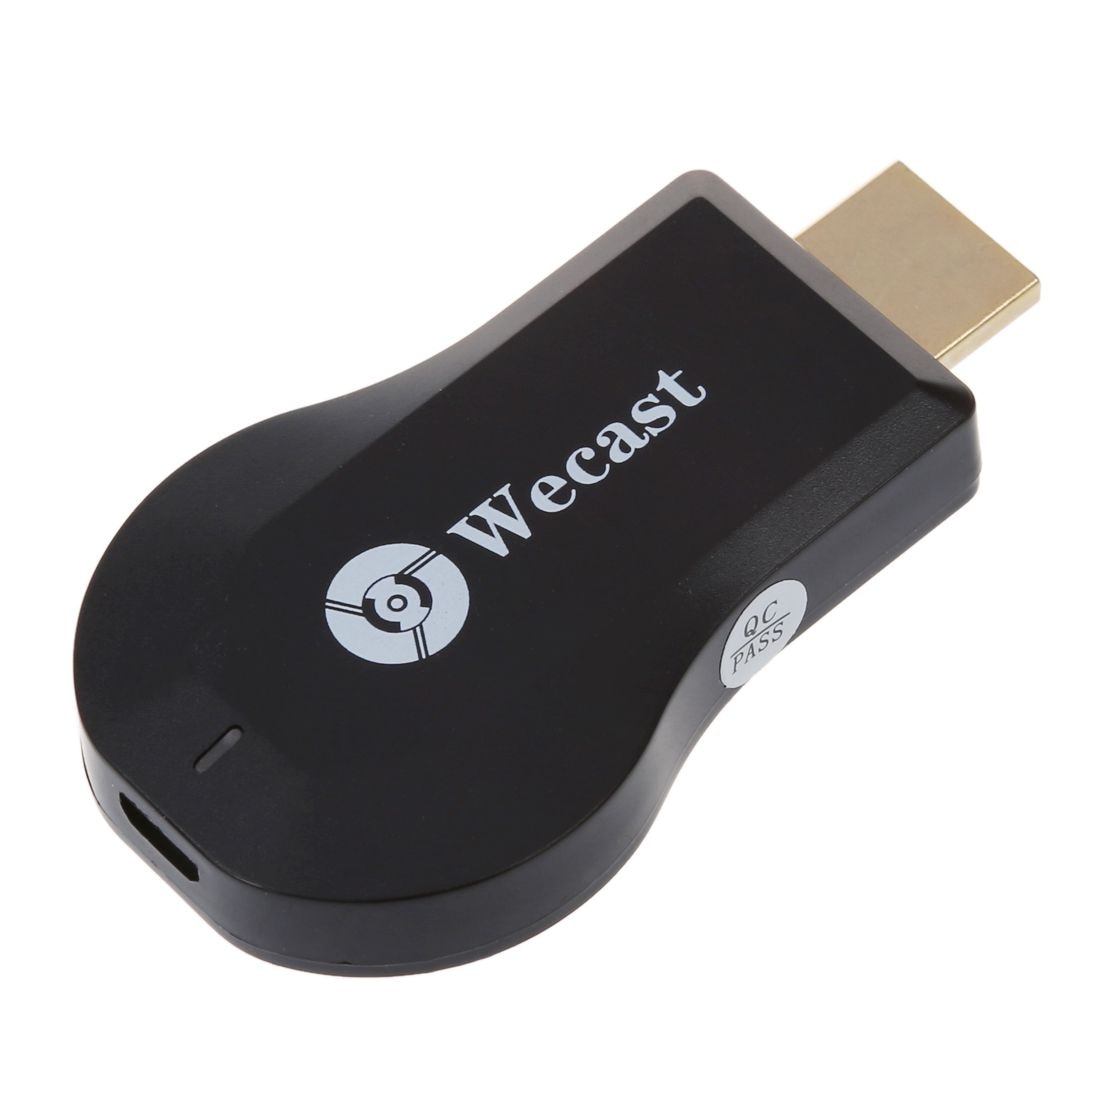 Wecast C2 Miracast Wifi Weergave Dongle Receiver 1080P Airplay Mirroring Dlna